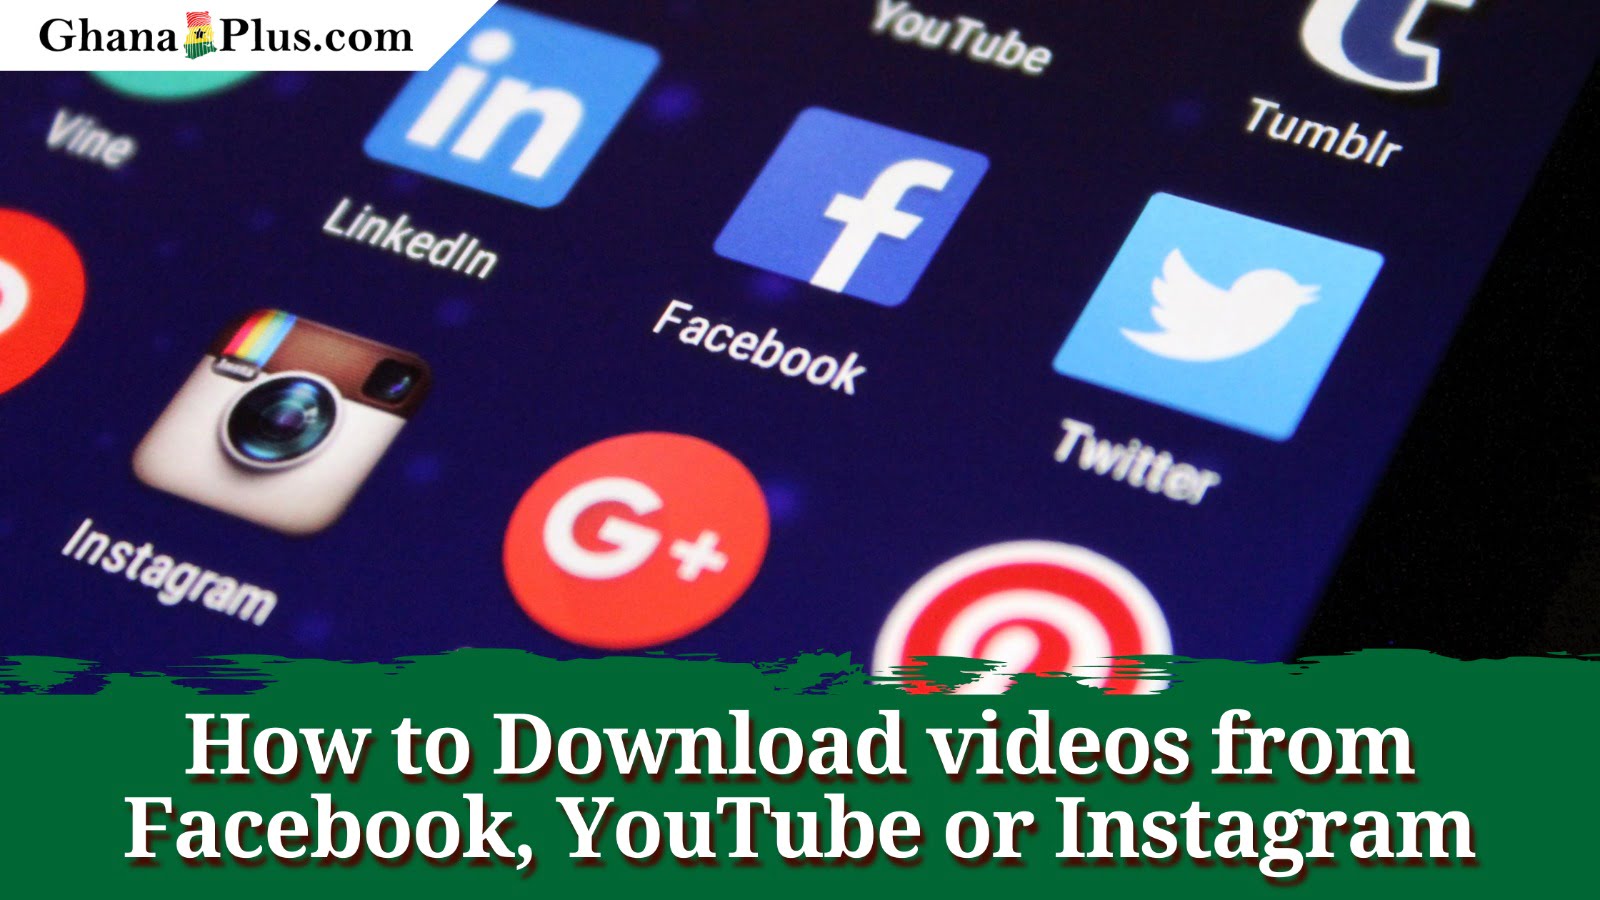 How to Download videos from Facebook, YouTube or Instagram